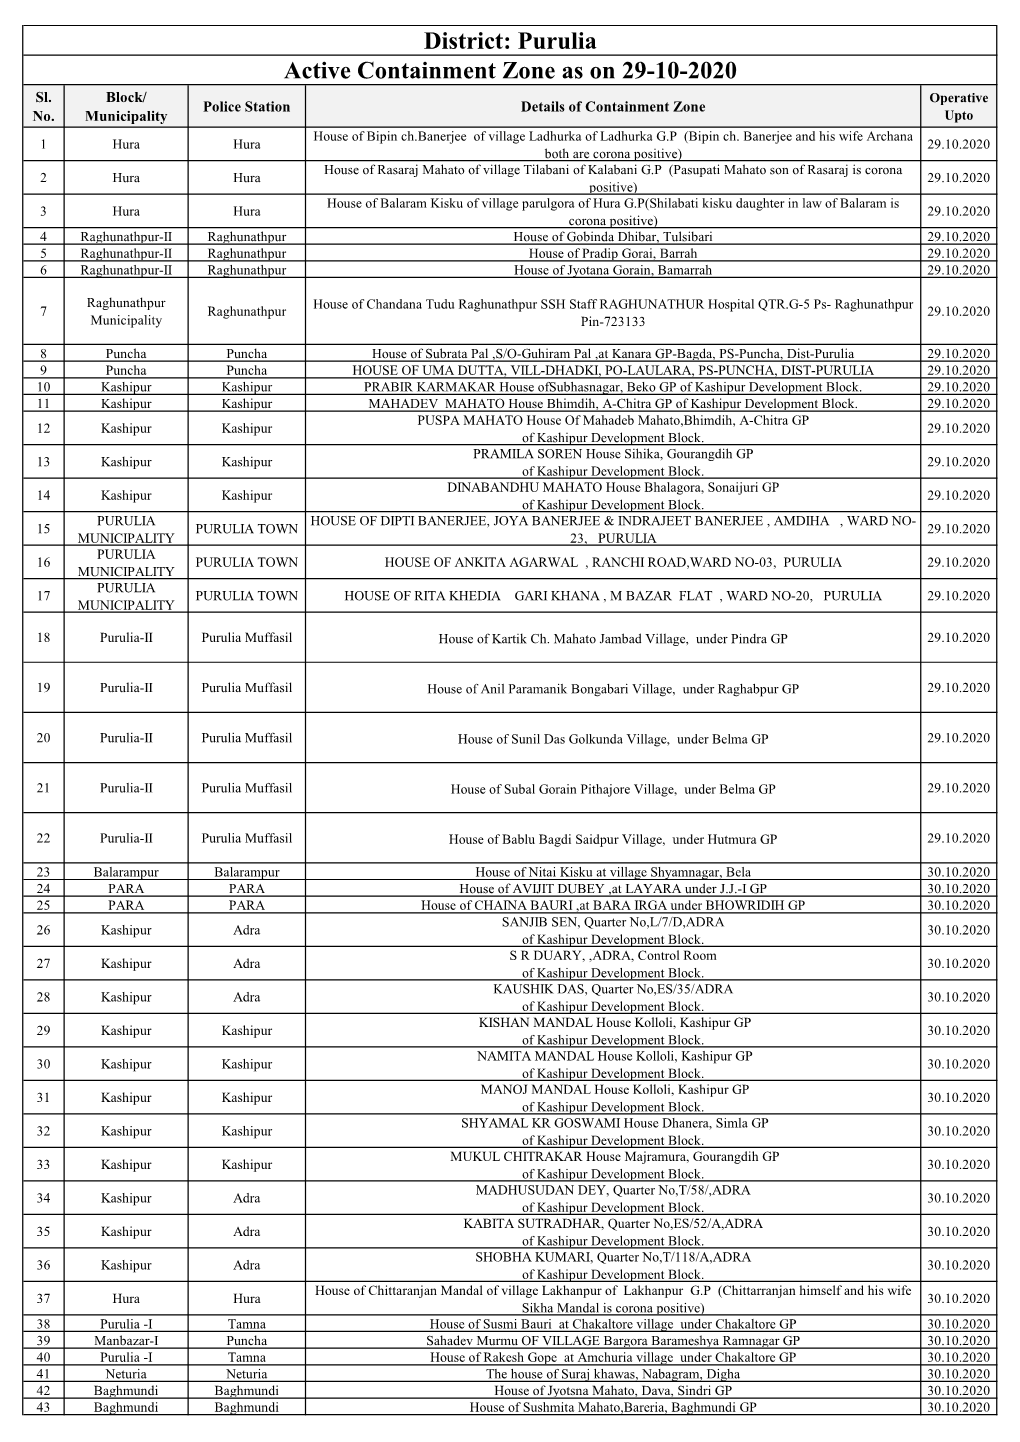 Active Containment Zone As on 29-10-2020 District: Purulia